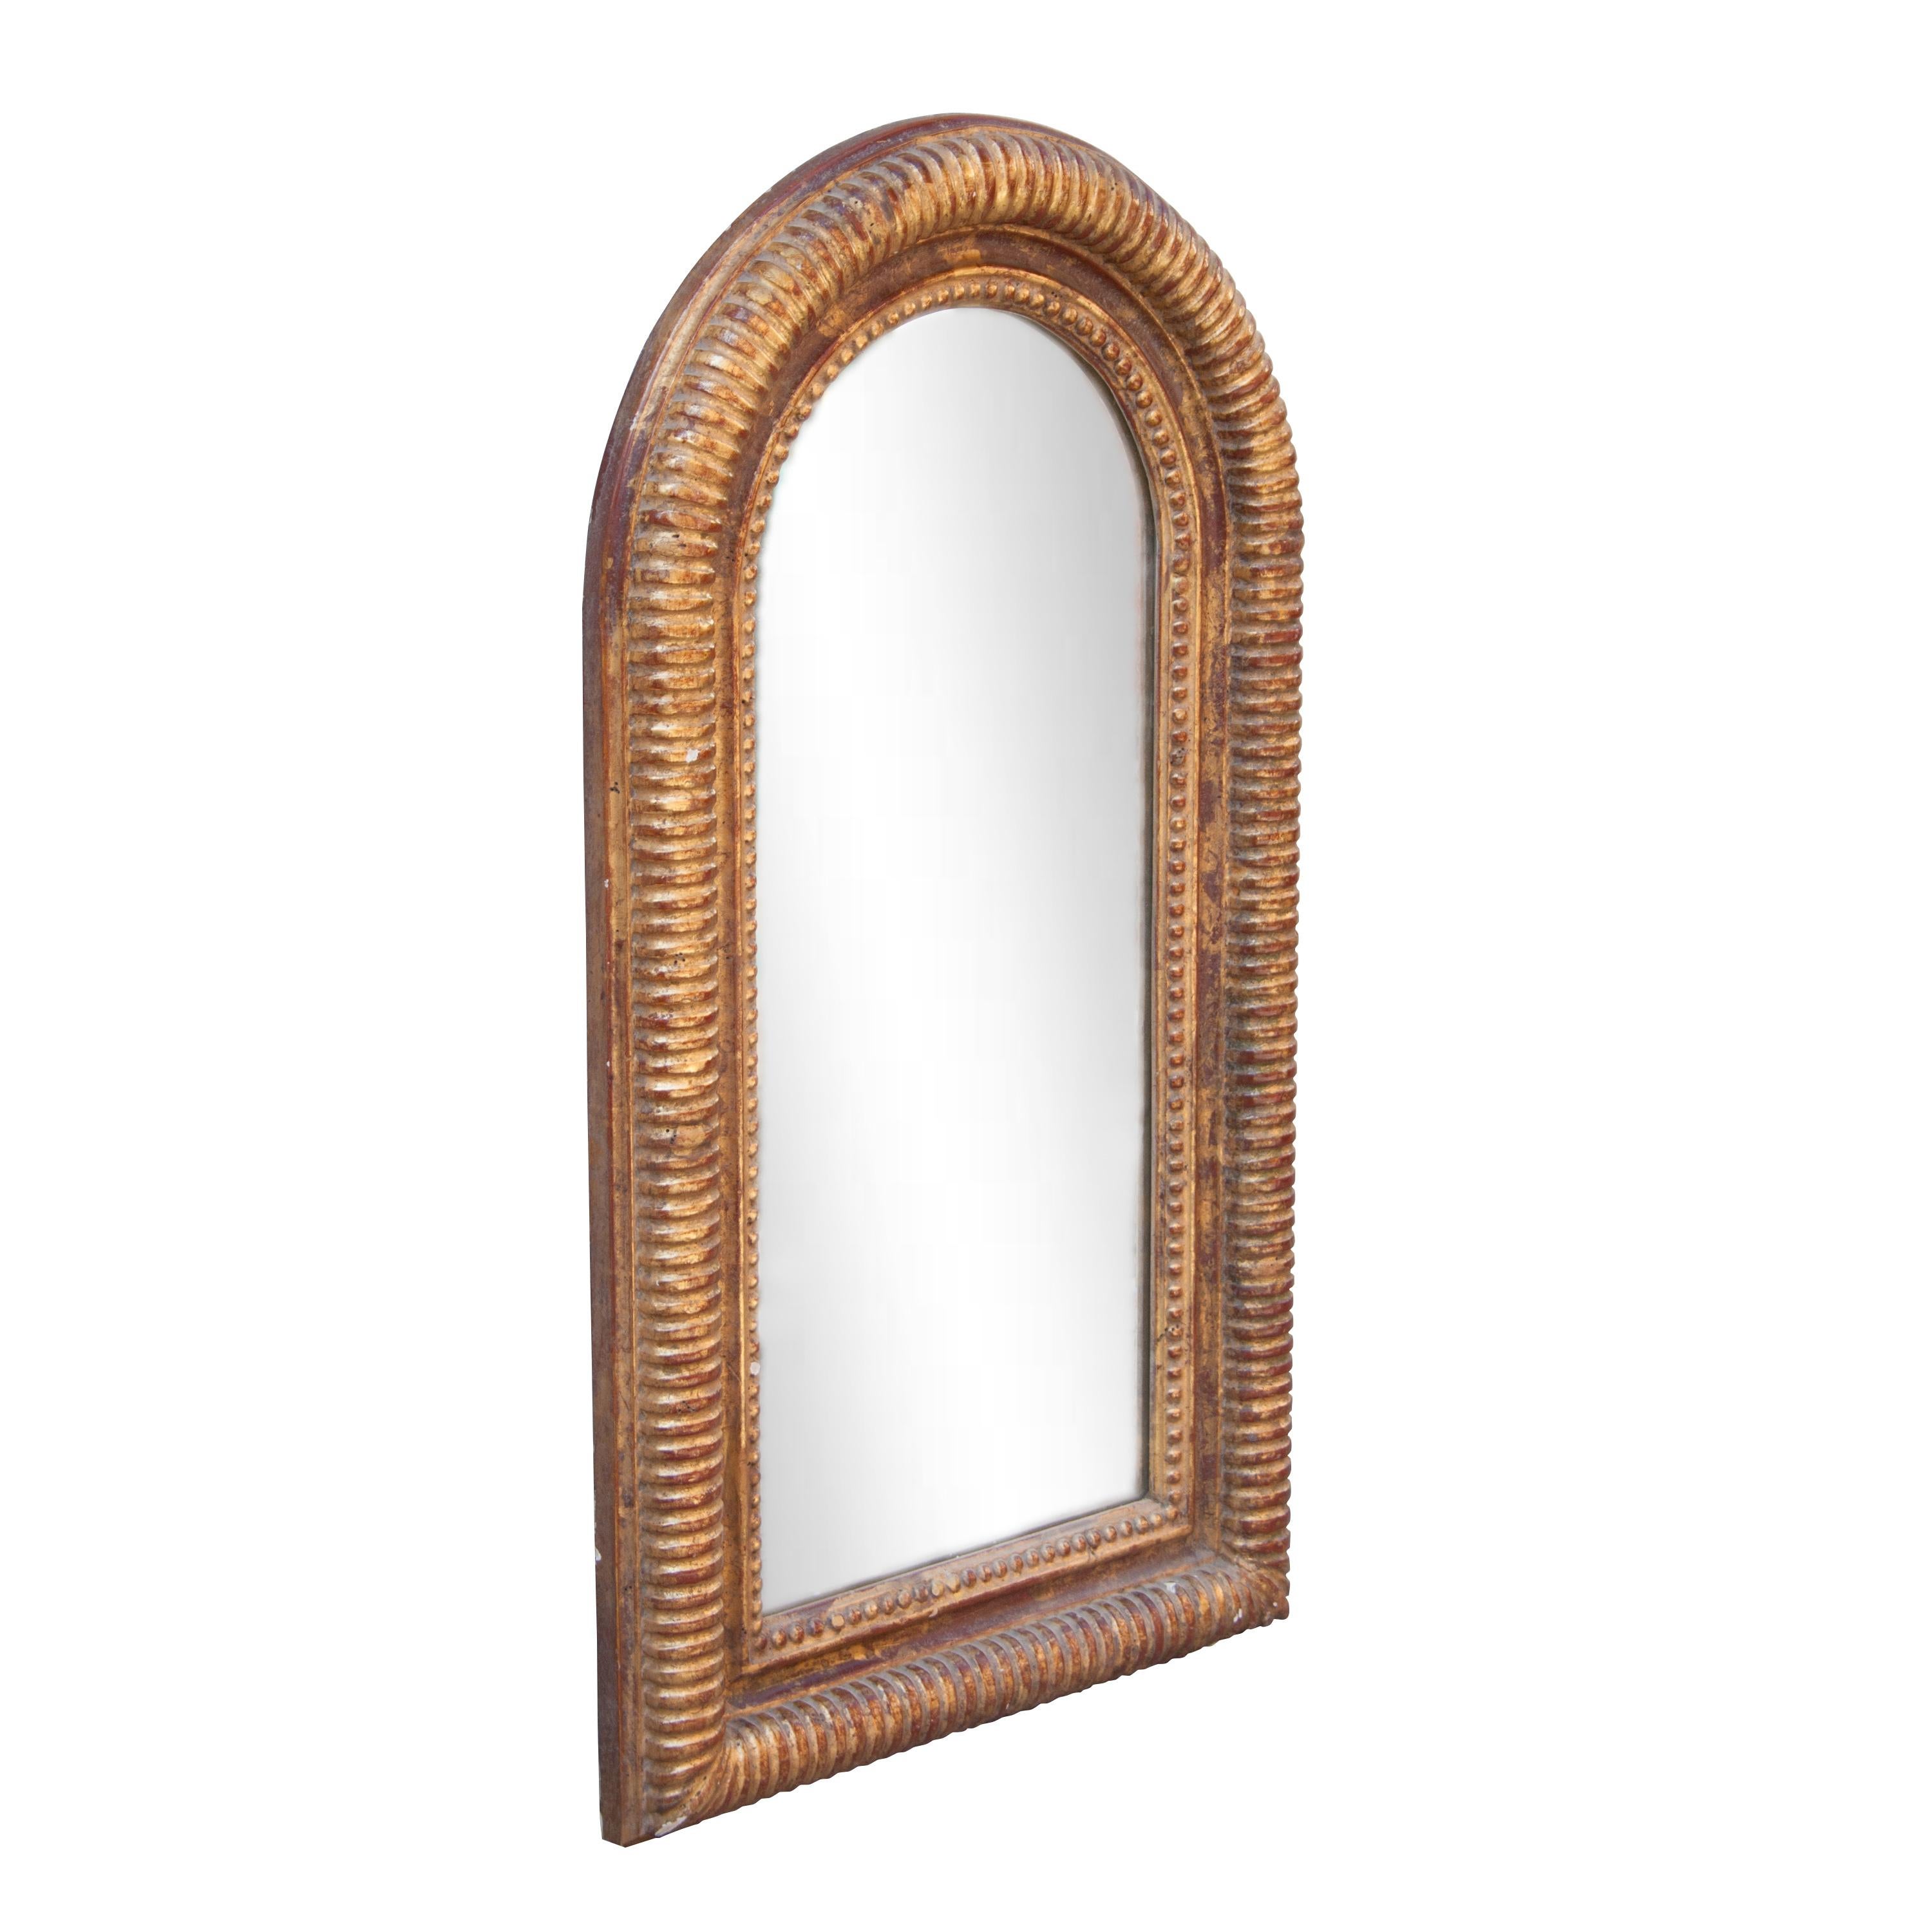 Neoclassical Regency style handcrafted mirror. Arch hand carved wooden structure with gold foiled finish, Spain, 1970.